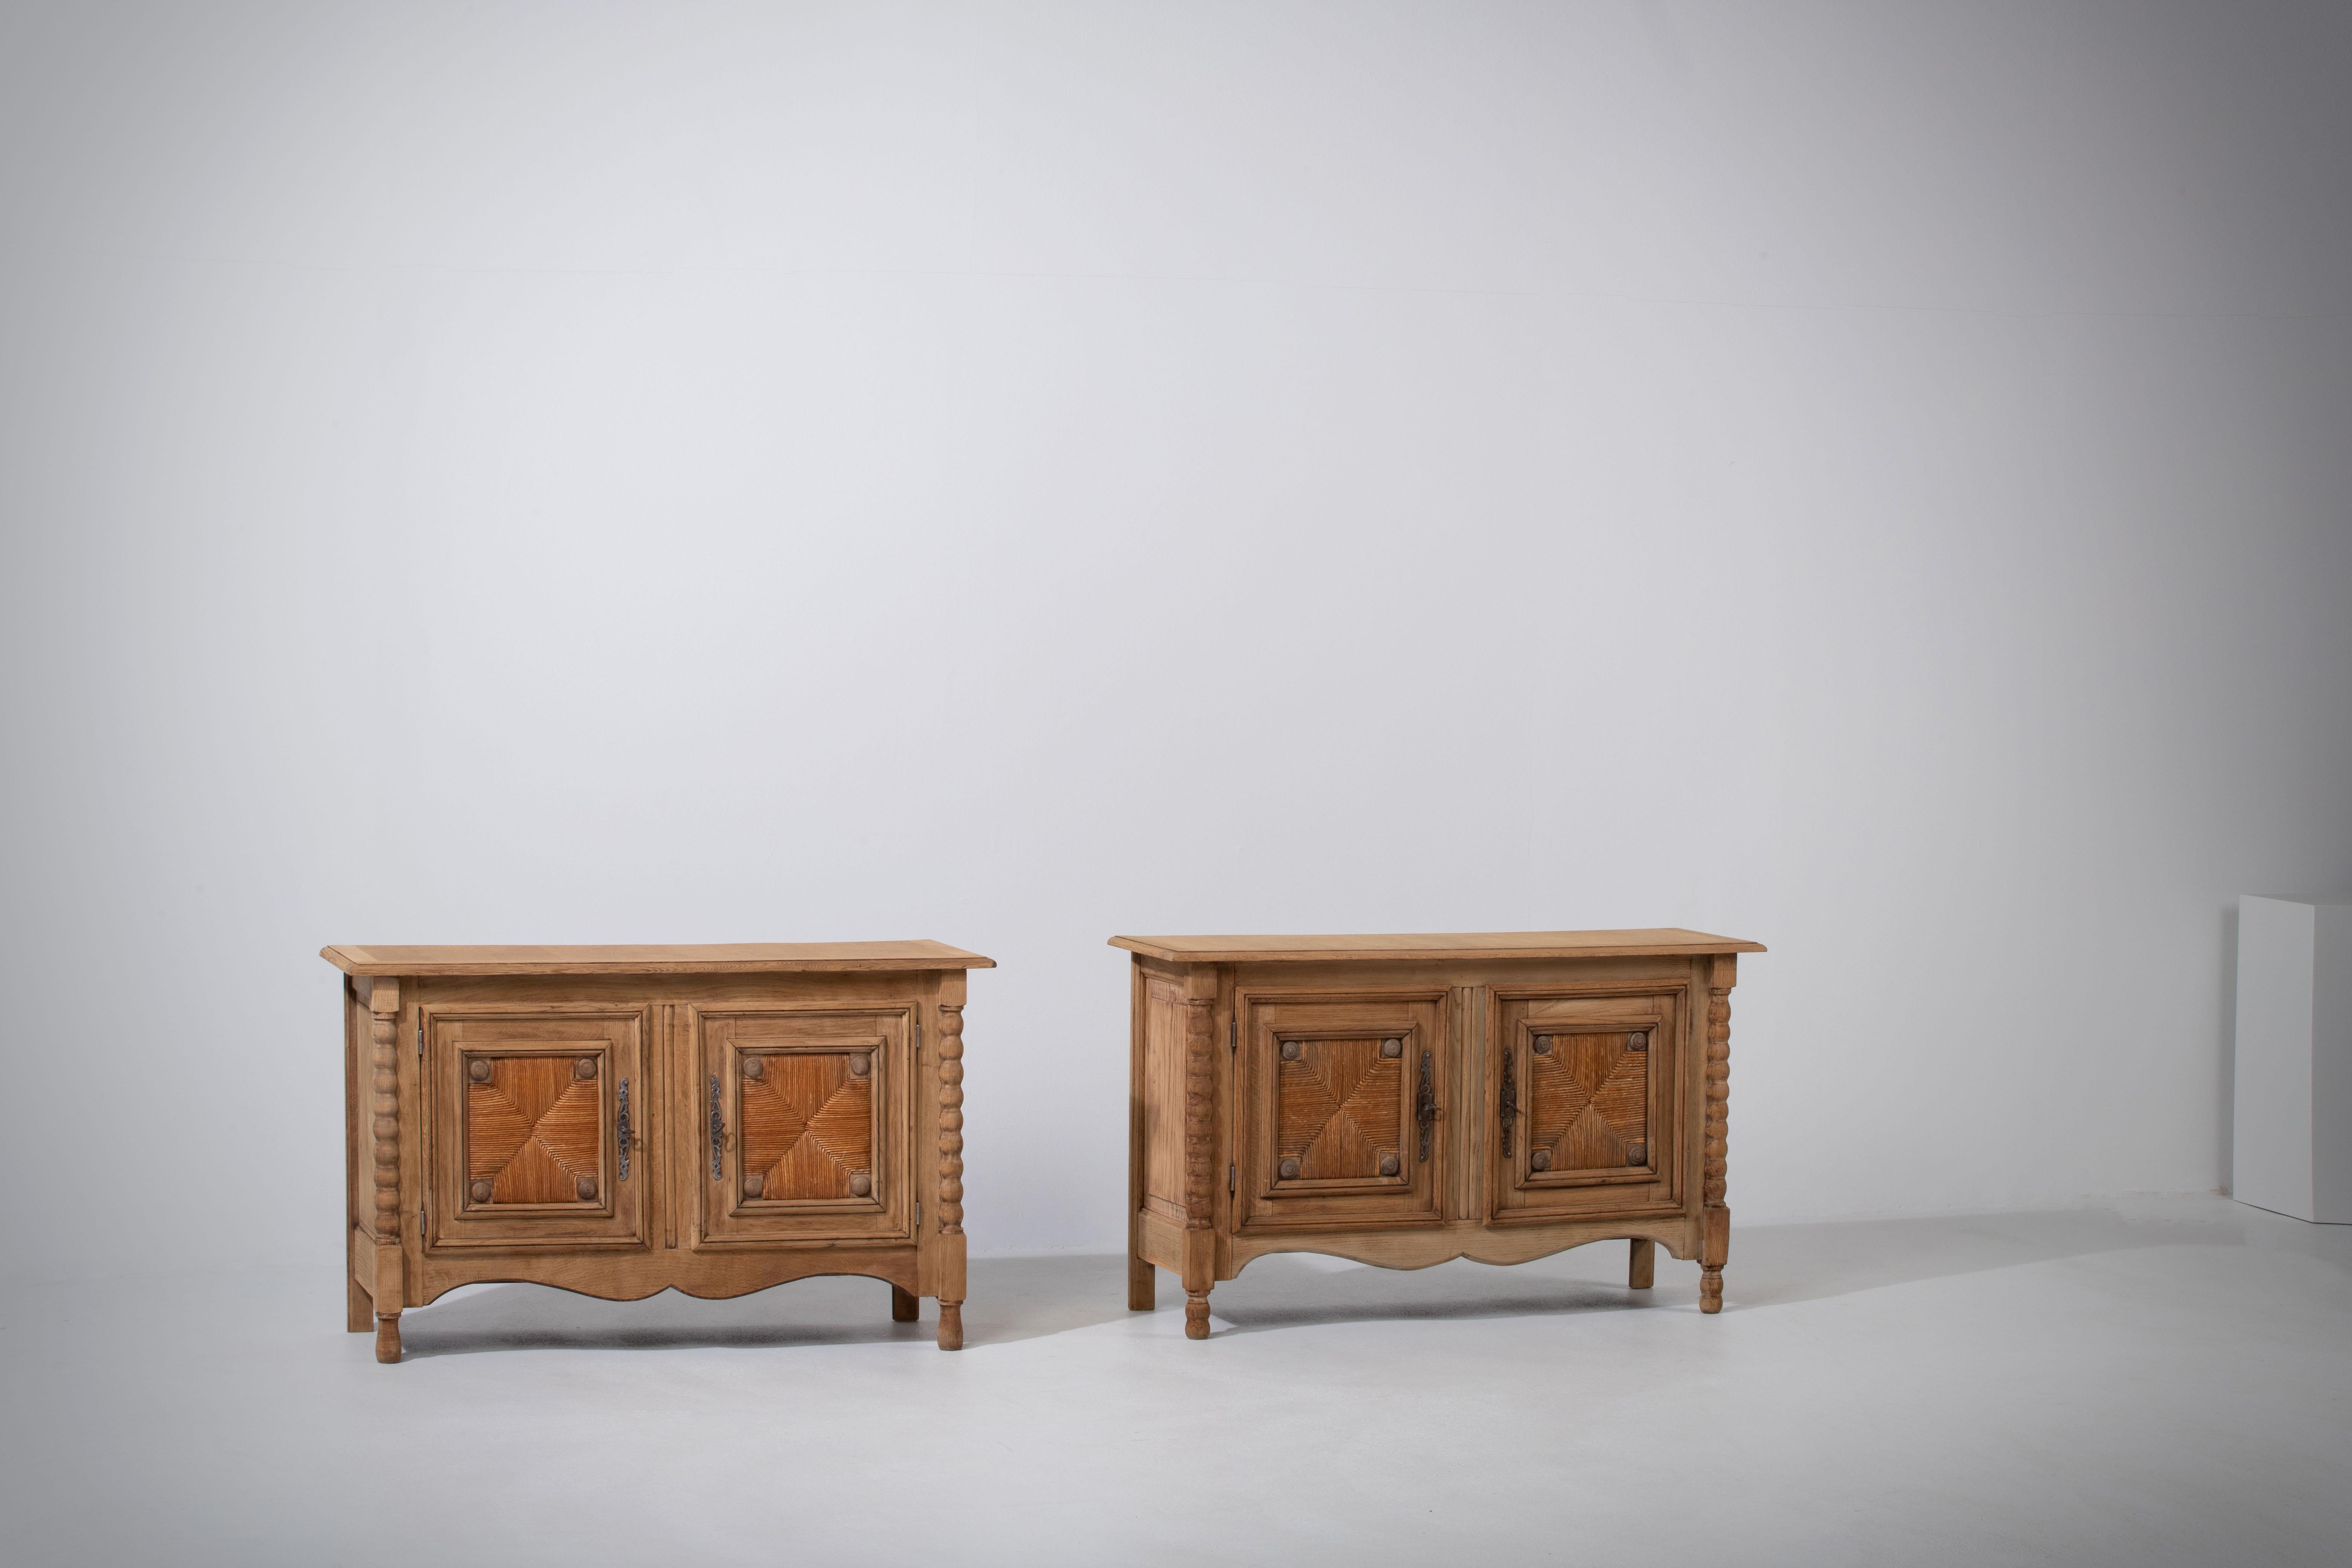 A pair of two door provencal cabinets from France, circa 1940.
Representing the casual yet refined aesthetic of the French countryside, patinated, enhancing the natural textured figure of the wood and subtle carved ornament. 

Once upon a time,